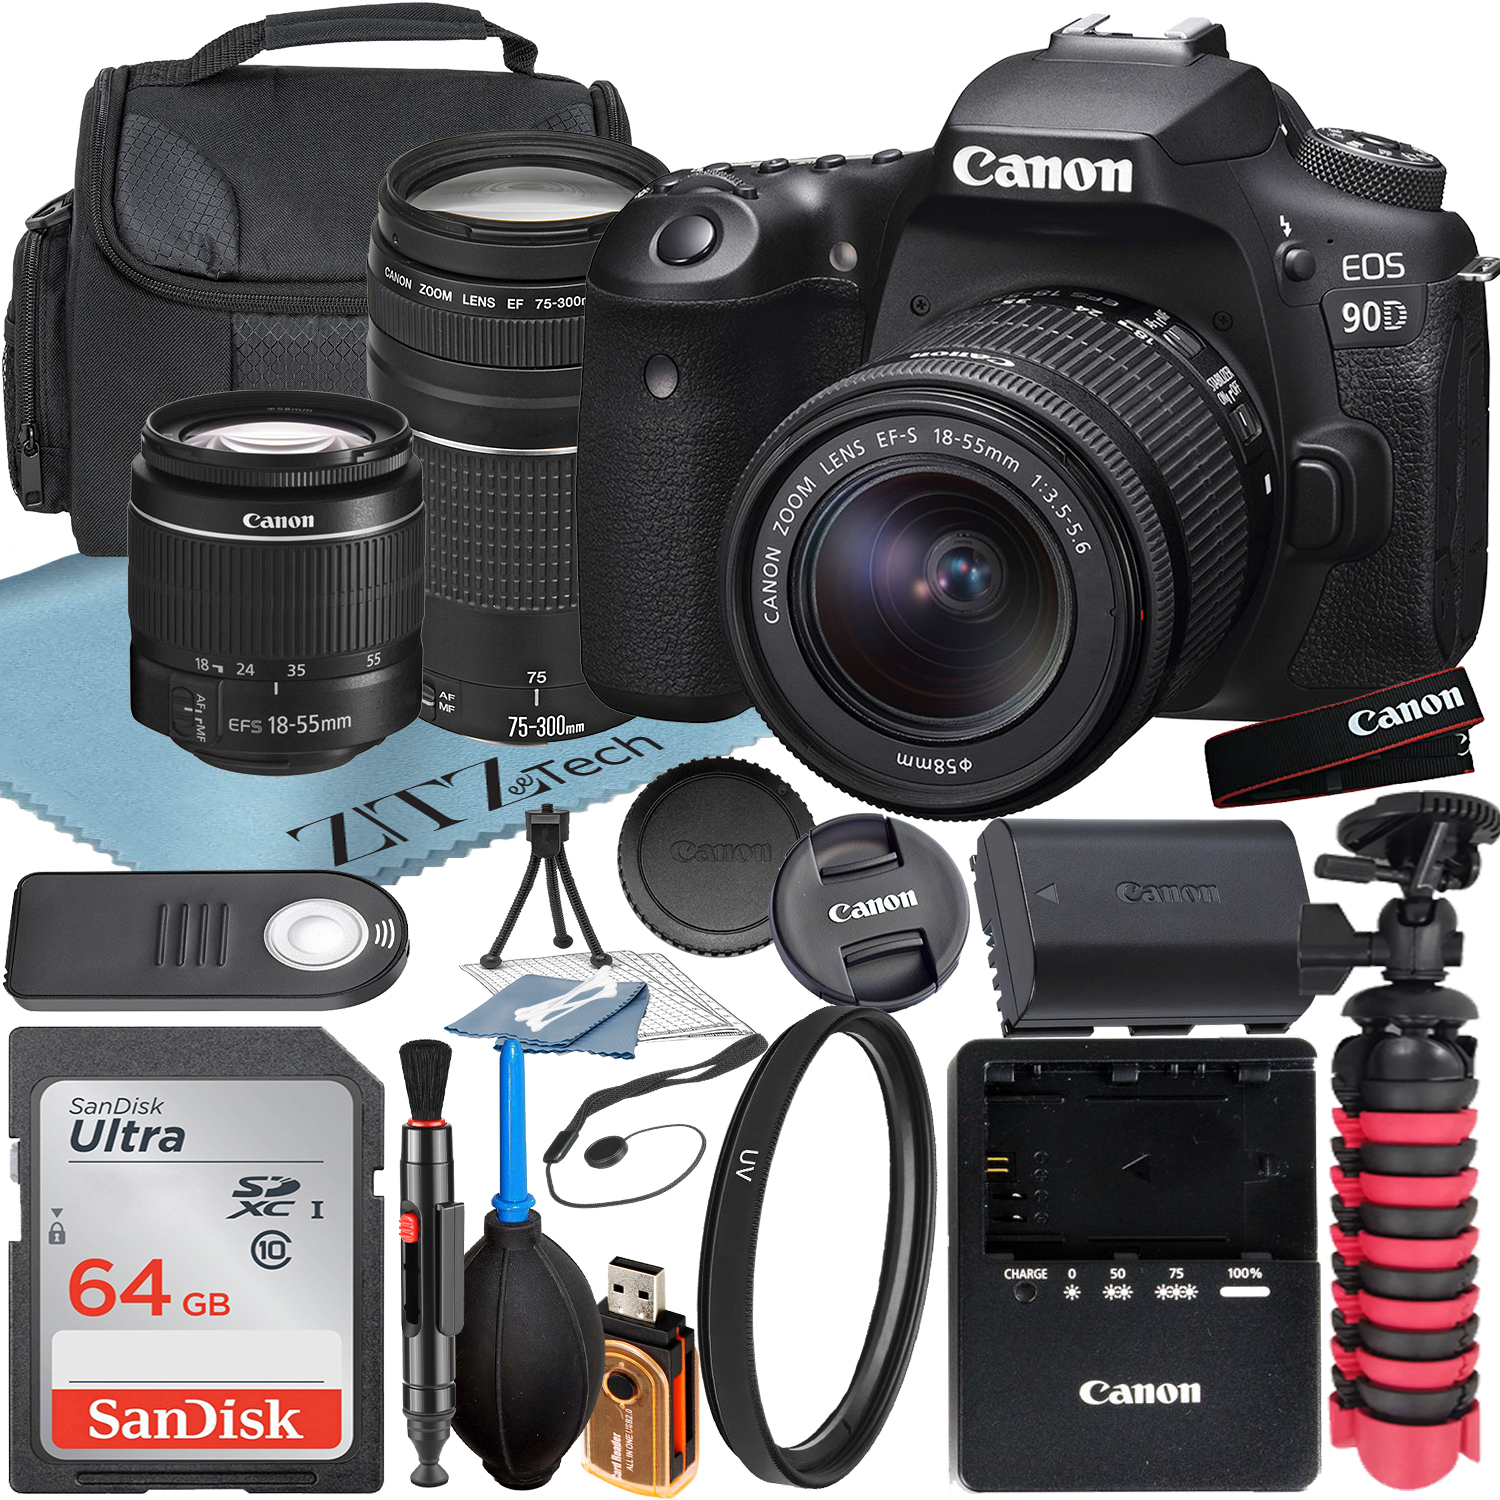 Canon EOS 90D DSLR Camera with 18-55mm + 75-300mm Lens + SanDisk 64GB Memory Card + Case + UV Filter + ZeeTech Accessory Bundle